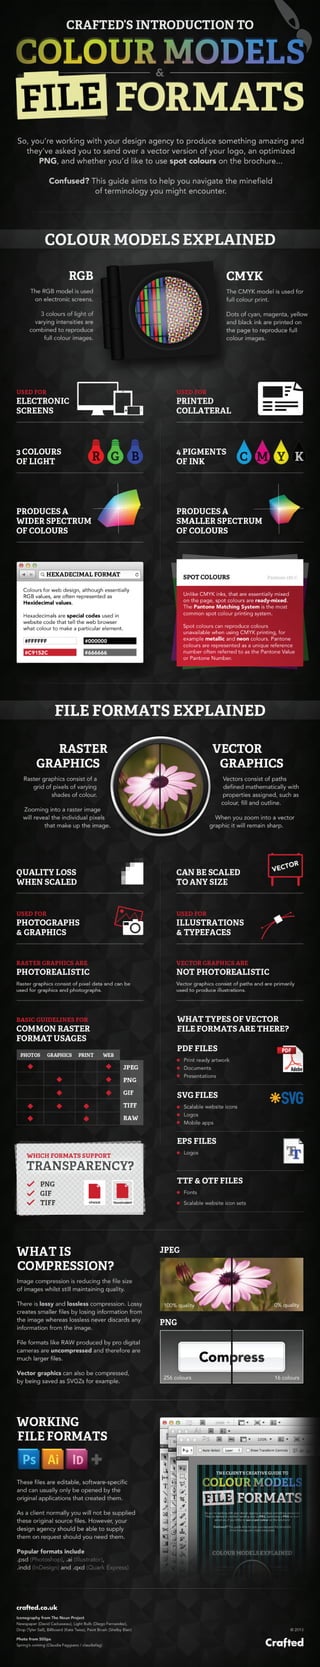 Infographic: a guide to colour models and file formats 